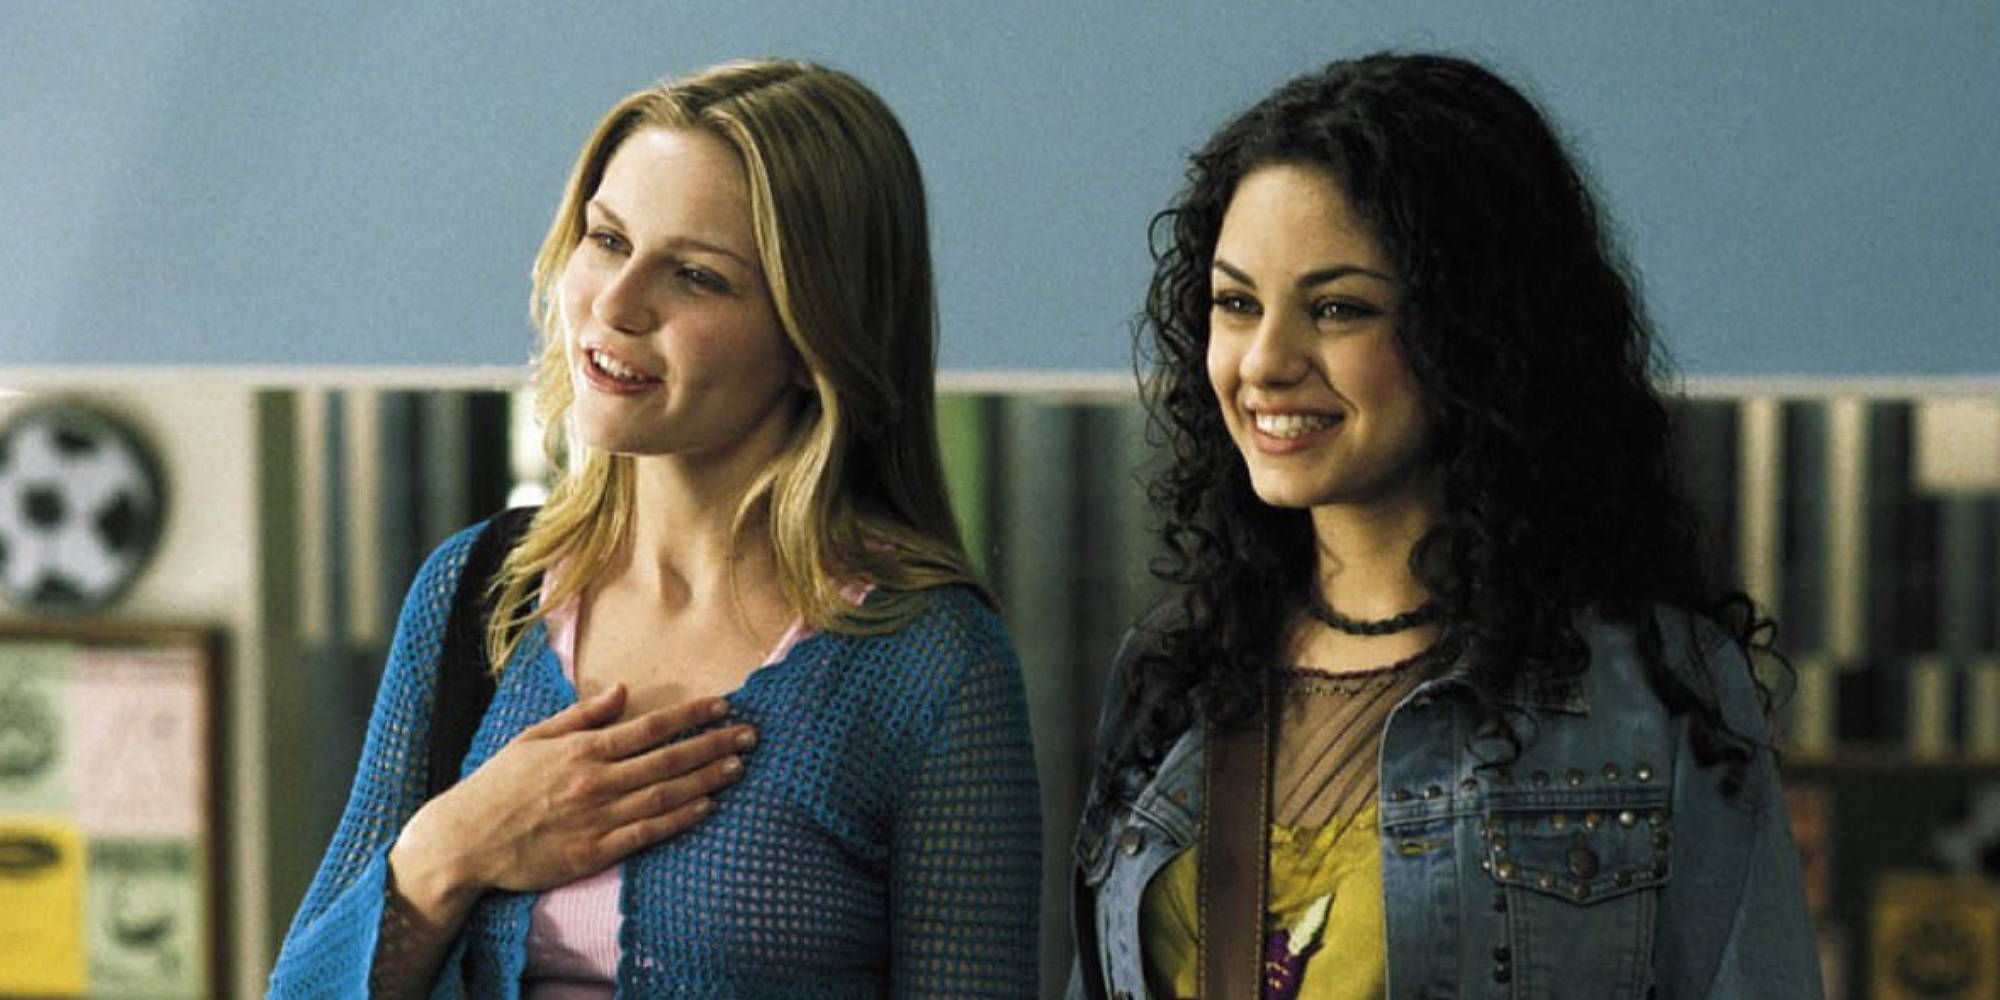 Kirsten Dunst and Mila Kunis standing side by side and smiling in Get Over It.